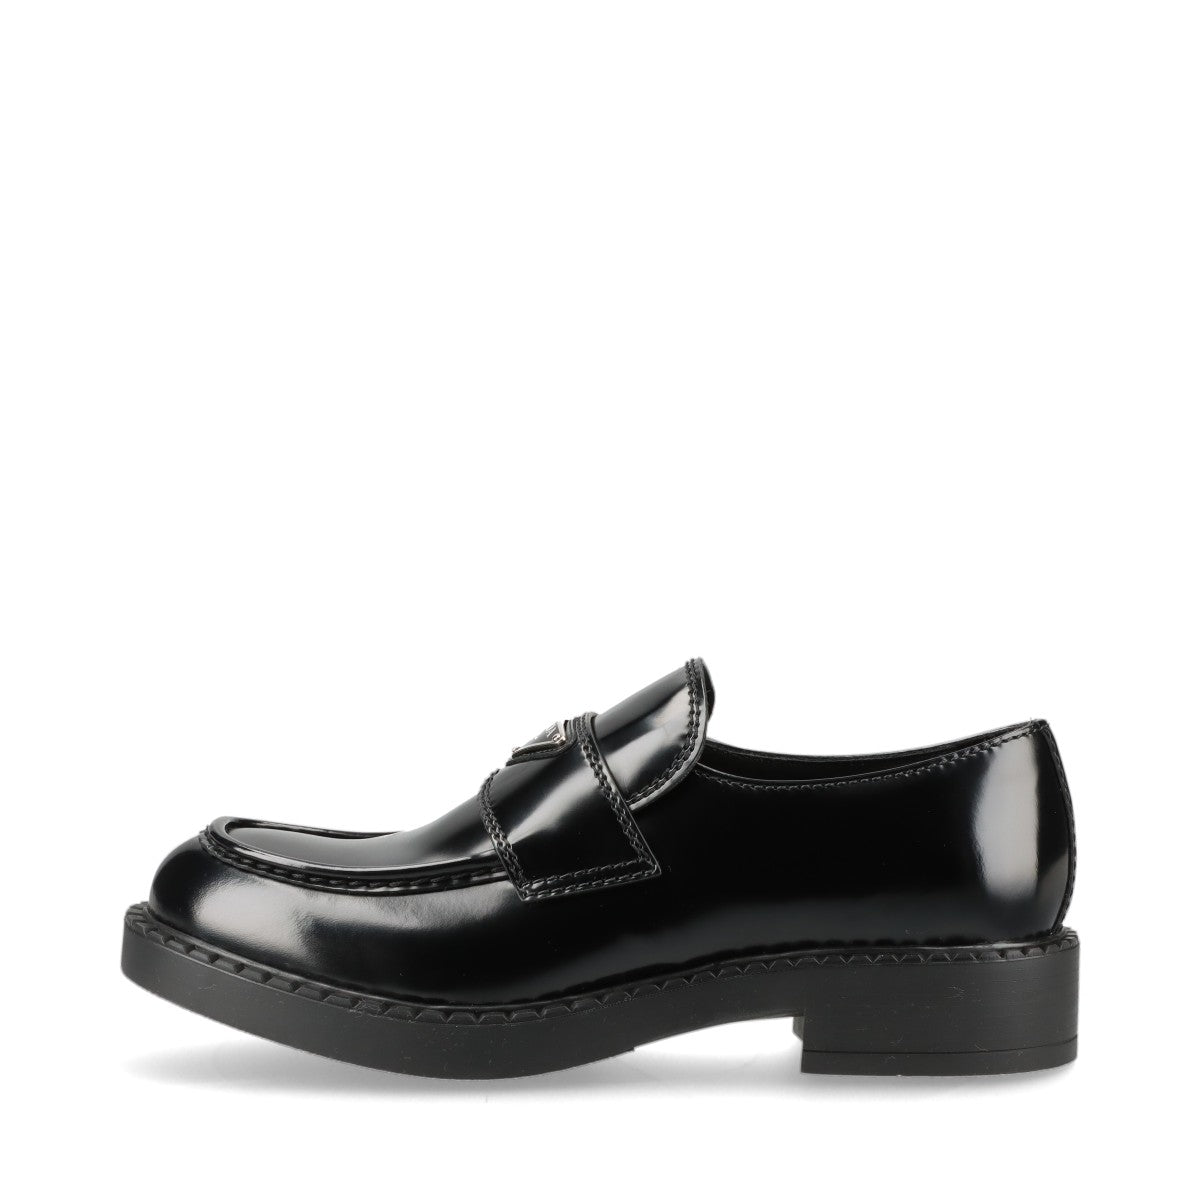 Prada Chocolate brushed leather Loafer 9 Men's Black 2DE127 Triangle logo Box There is a storage bag